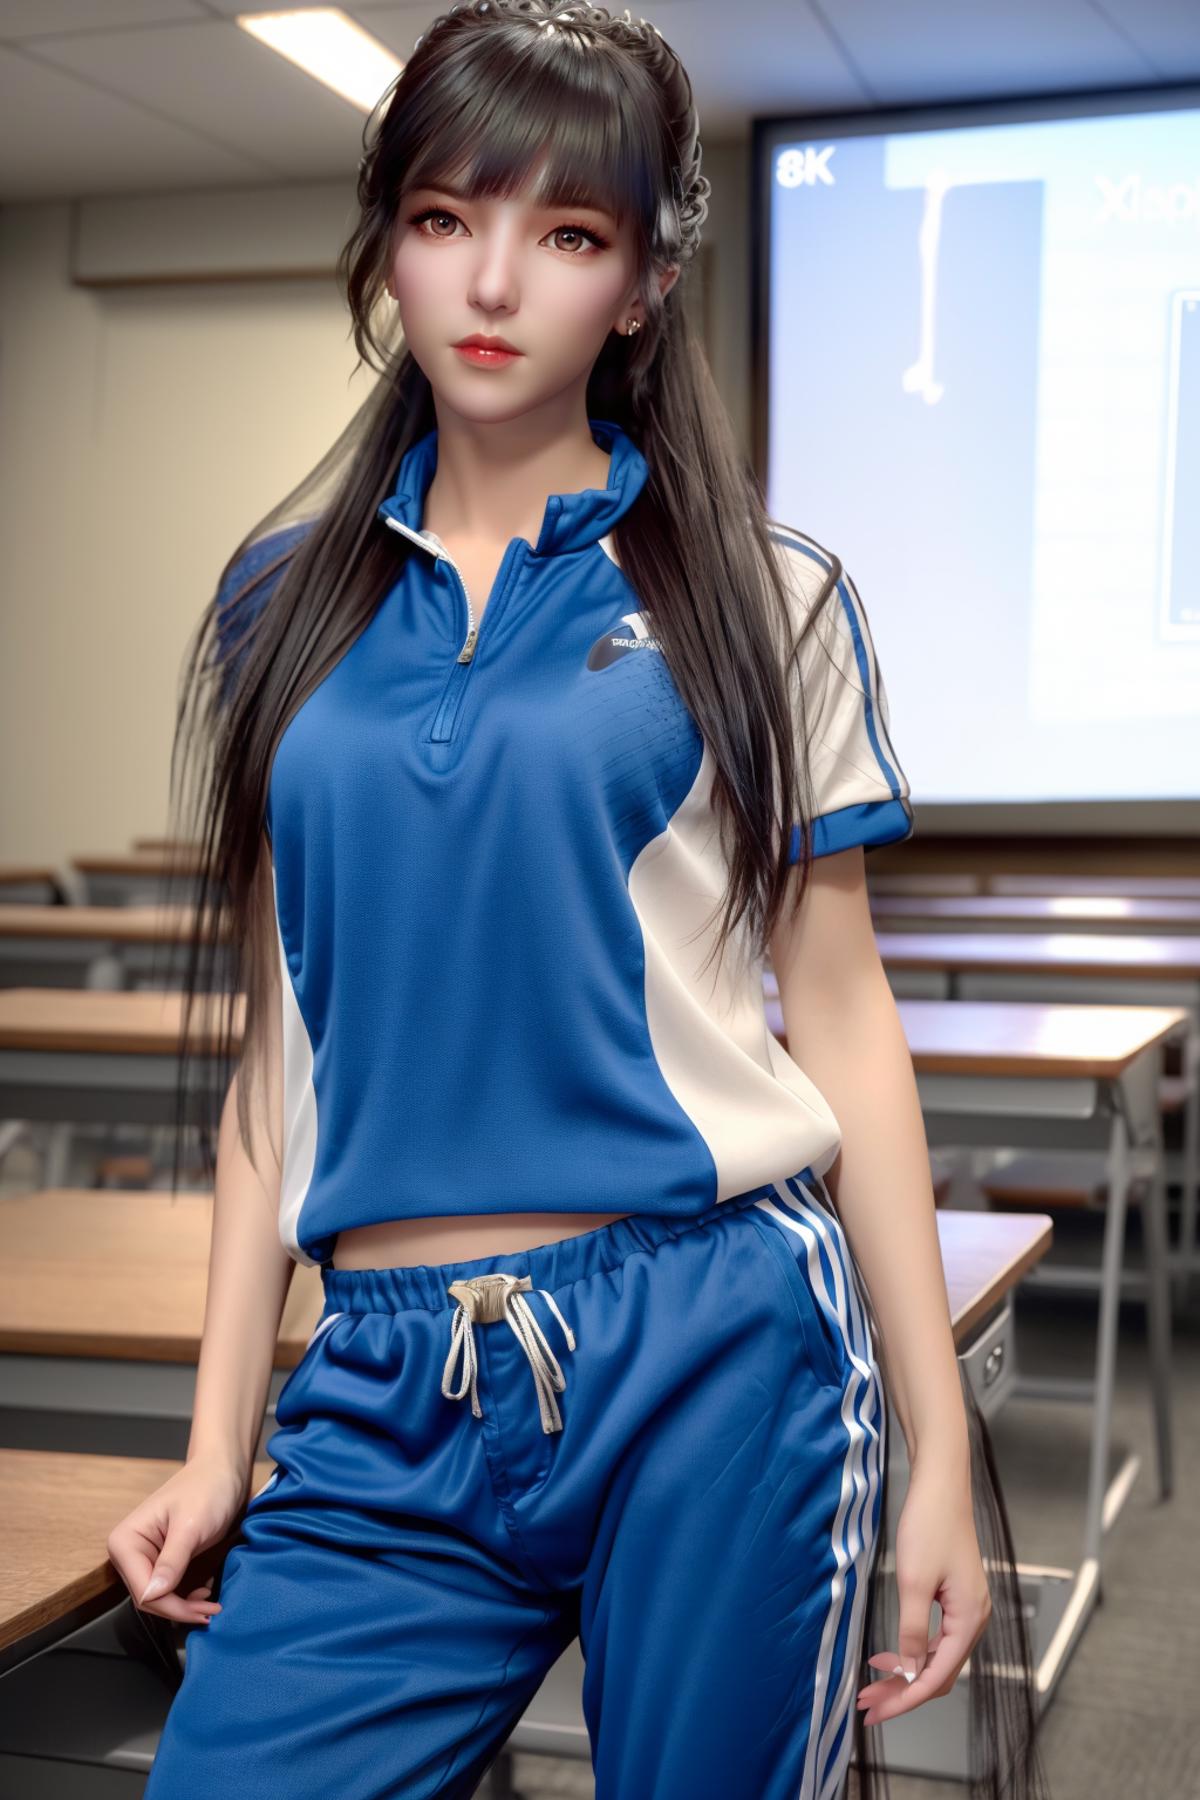 AI model image by ys